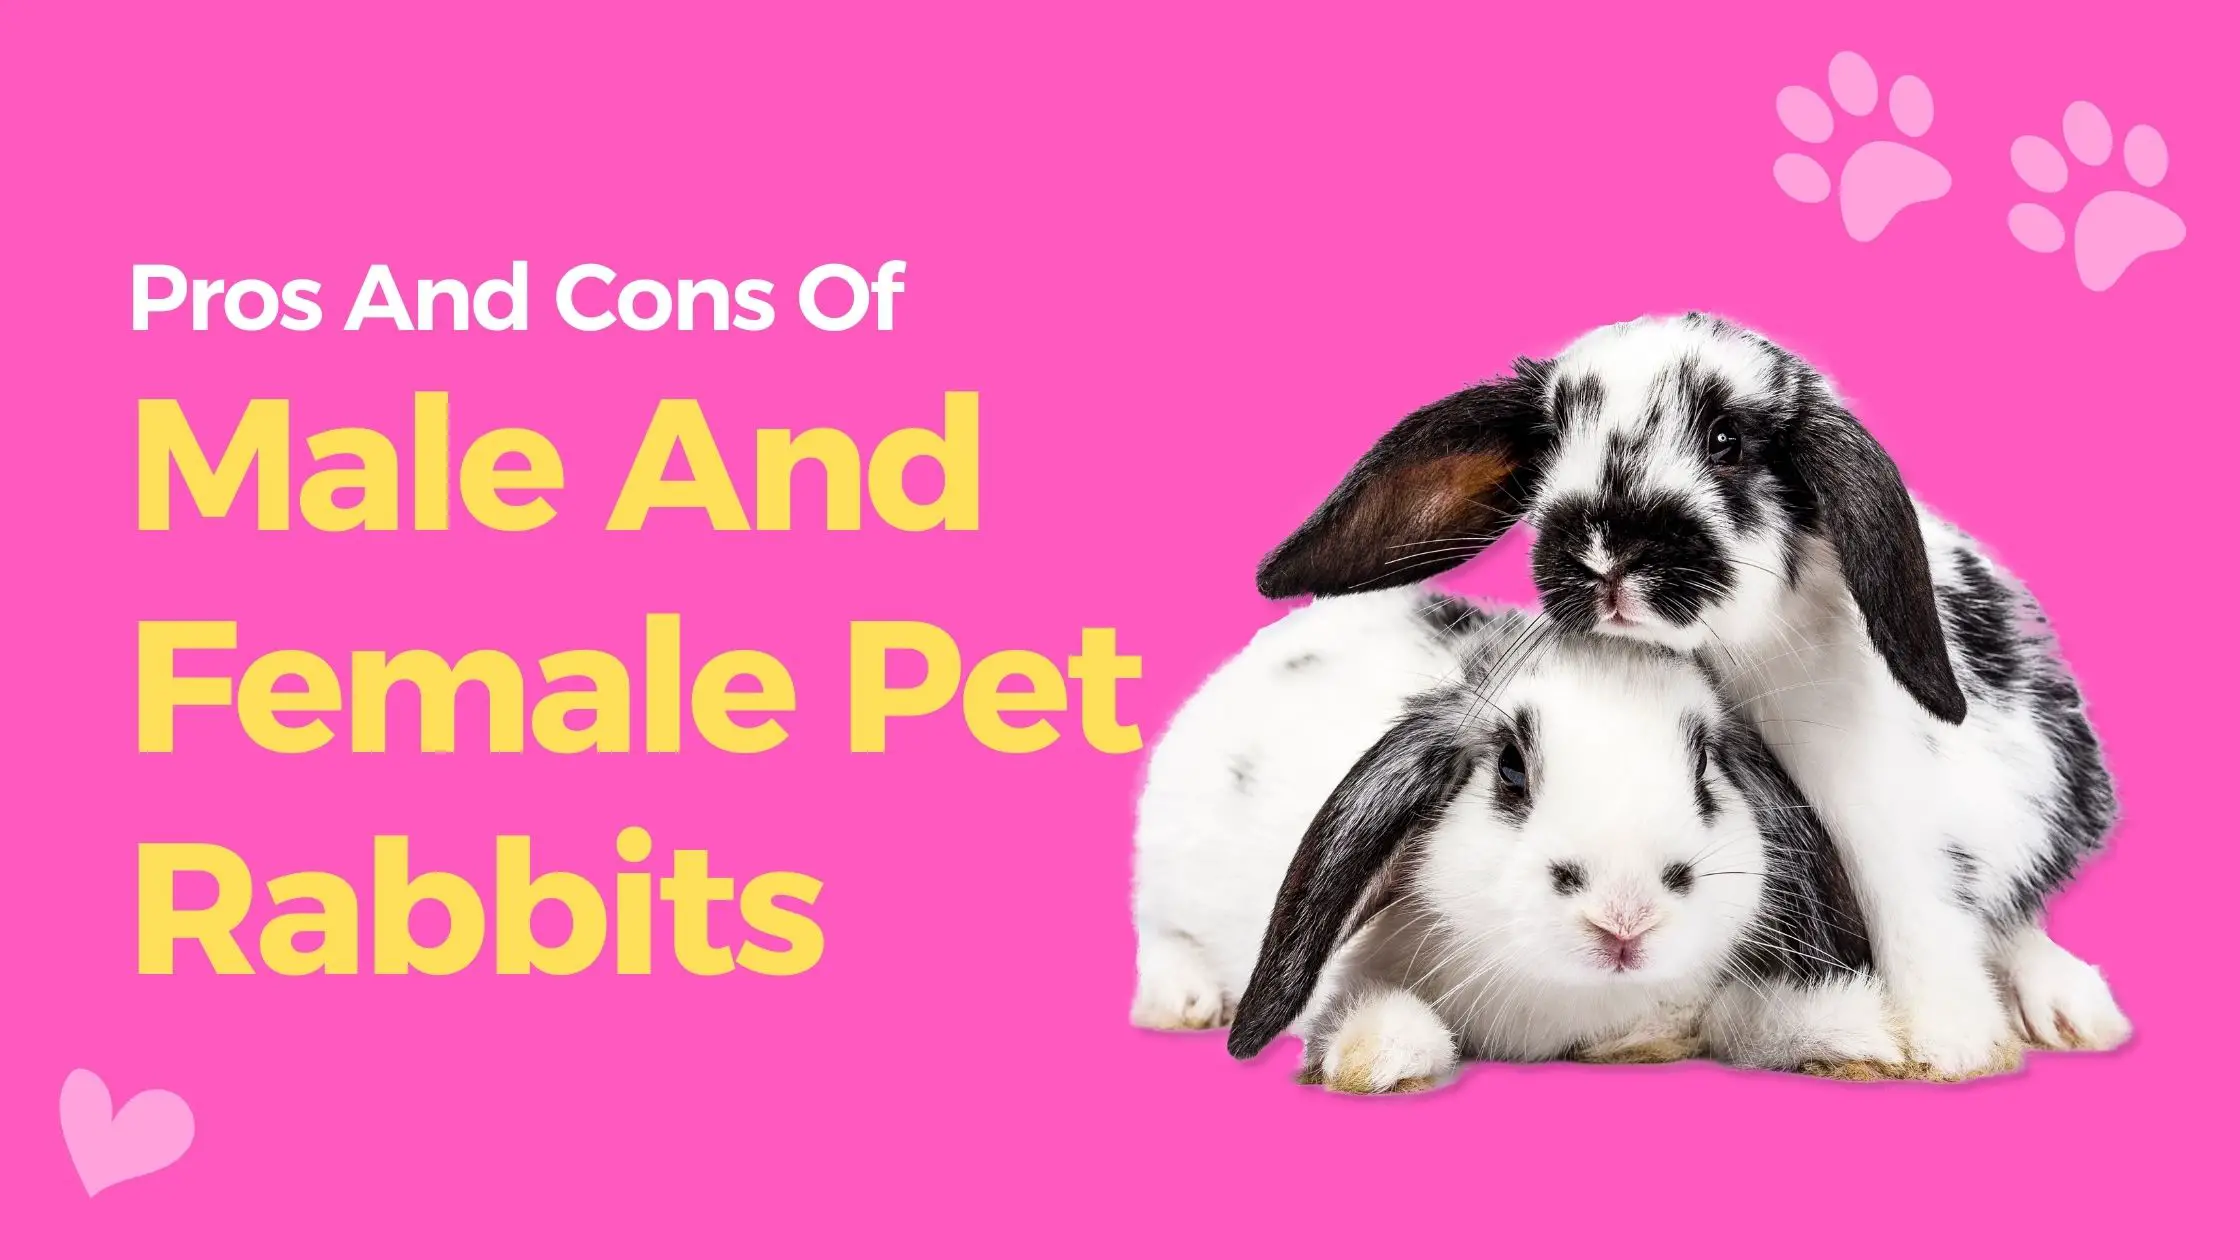 Pros And Cons Of Male And Female Pet Rabbits